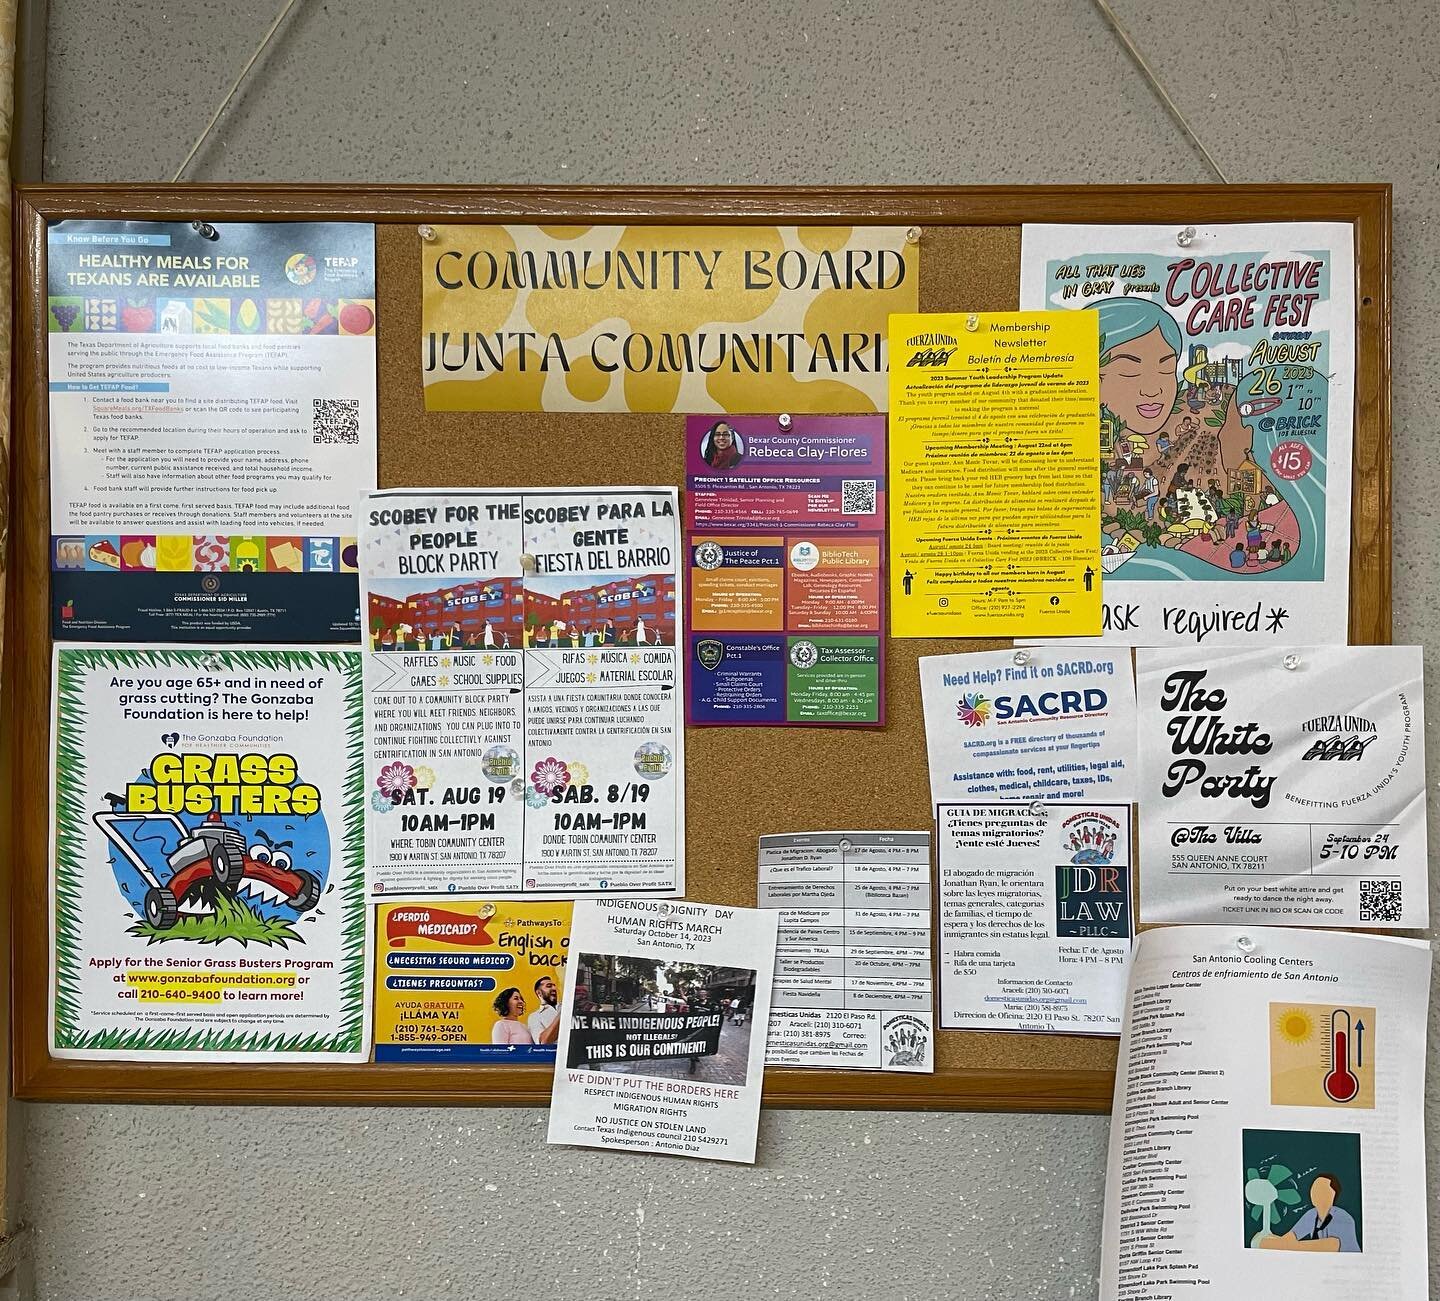 INTRODUCING: our NEW community board! Stop by the office during business hours (M-F 9-5pm) to keep yourself updated on what&rsquo;s going on in our community AND/OR put up your own information on the board! 
&mdash;&mdash;
PRESENTAMOS: &iexcl;nuestra